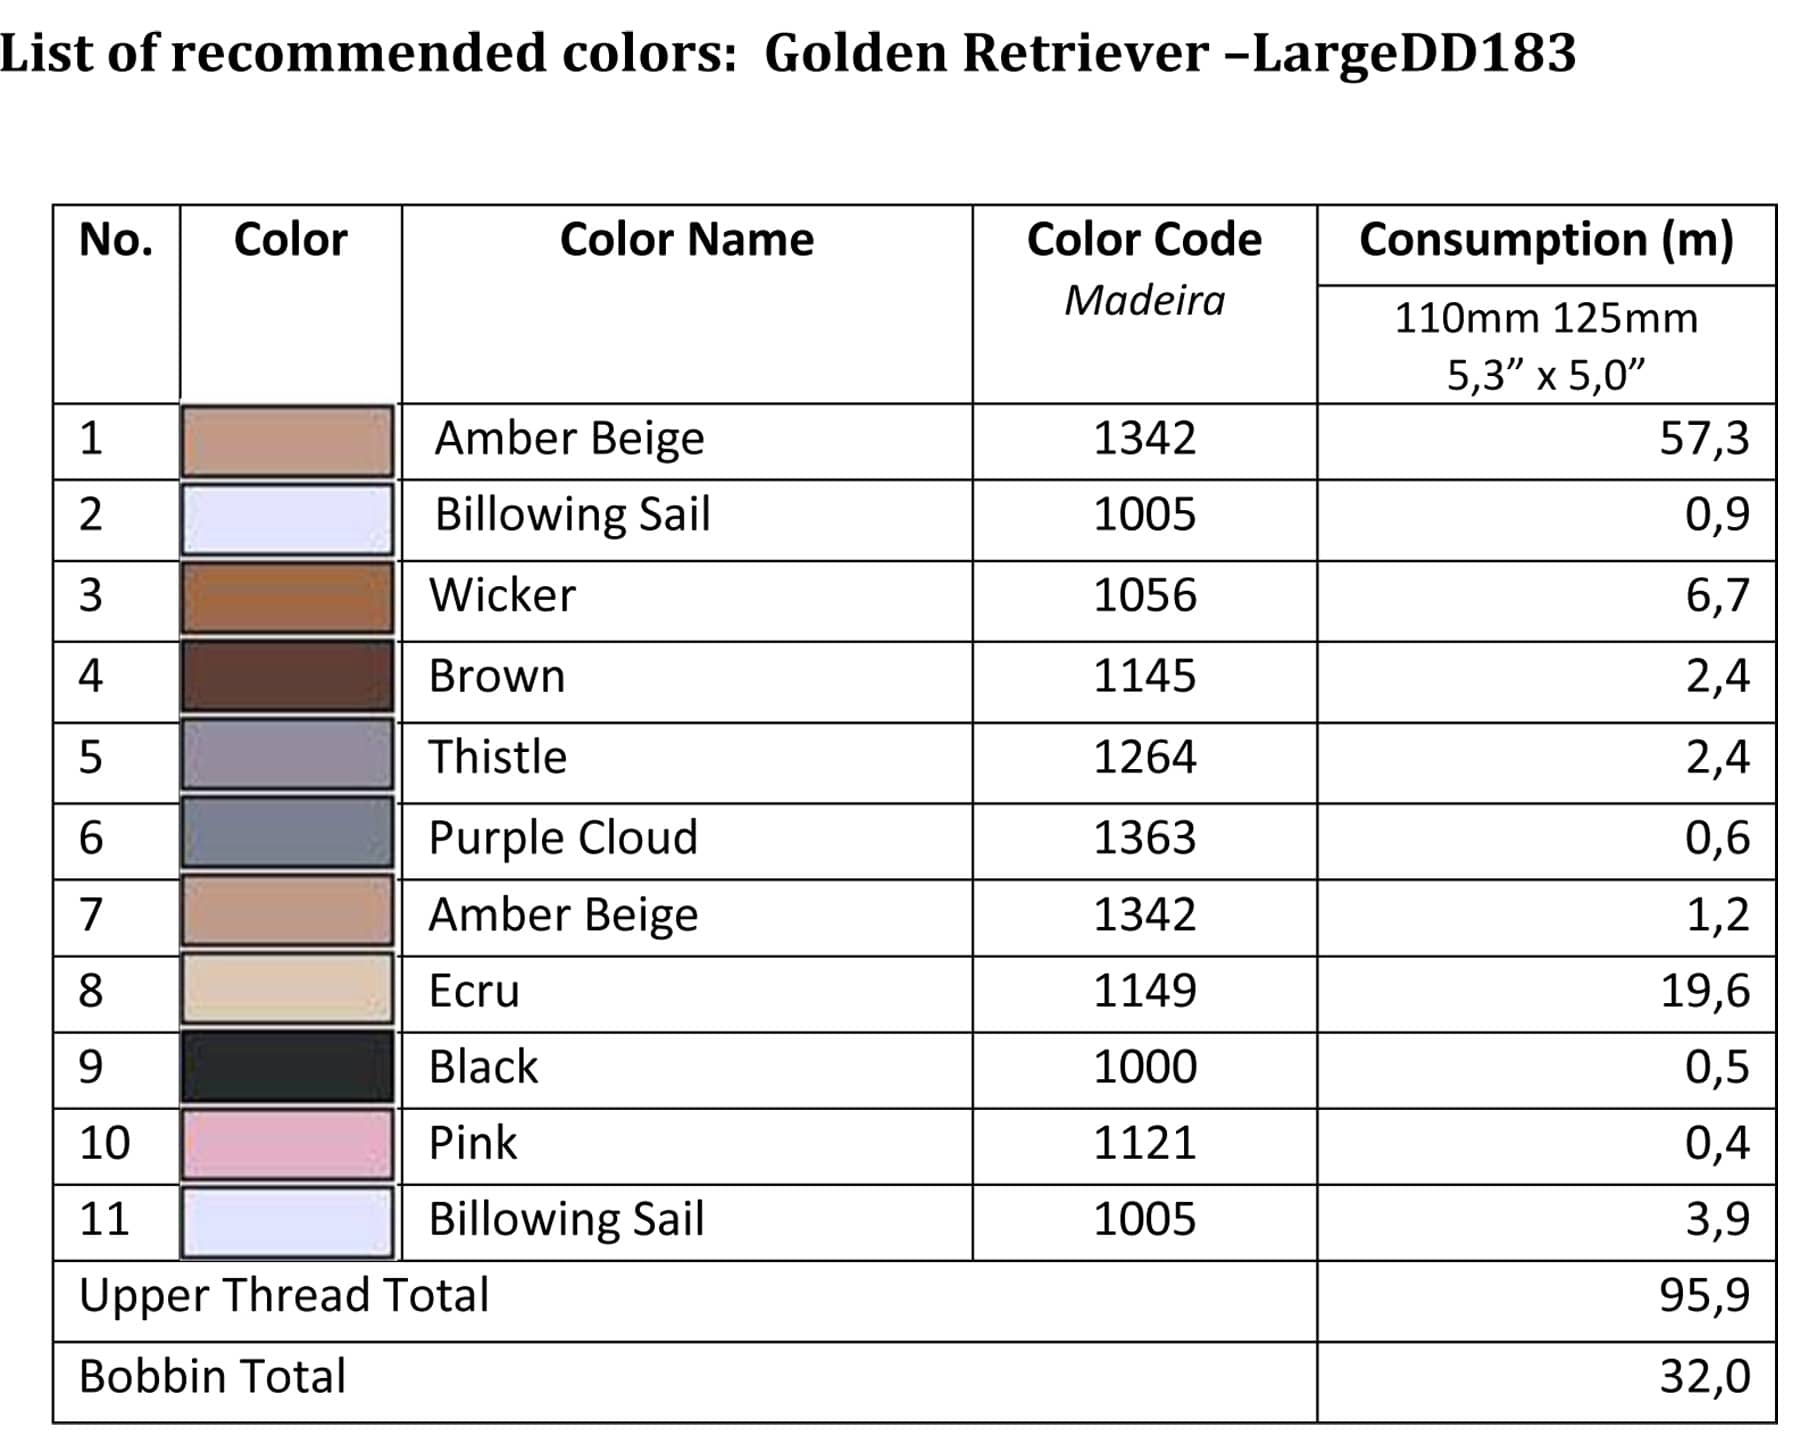 List of recommended colors - LargeDD183